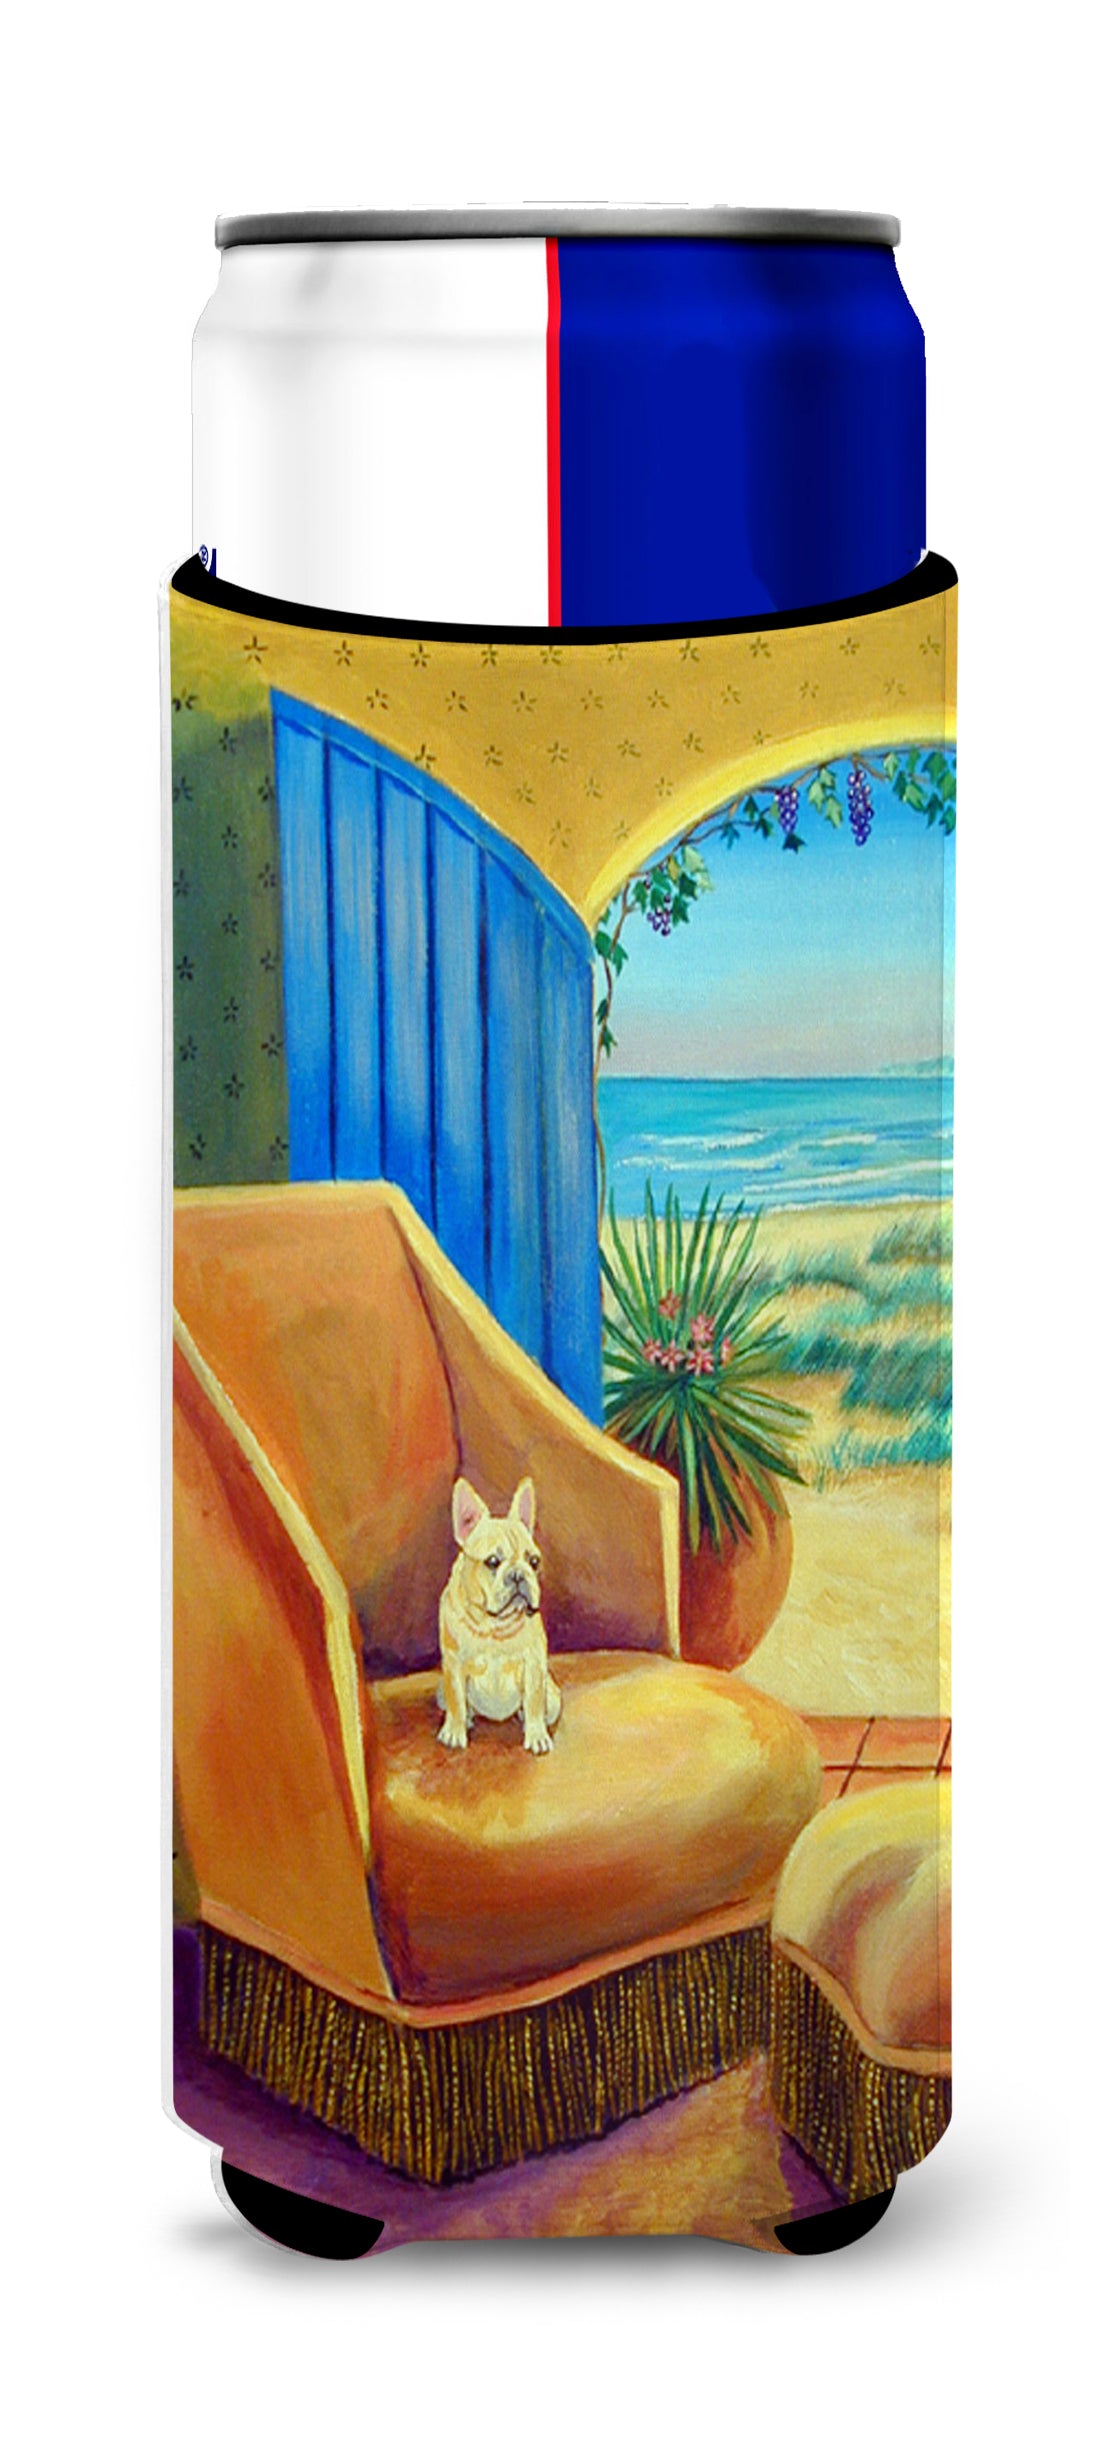 French Bulldog at the beach cottage Ultra Beverage Insulators for slim cans 7181MUK.